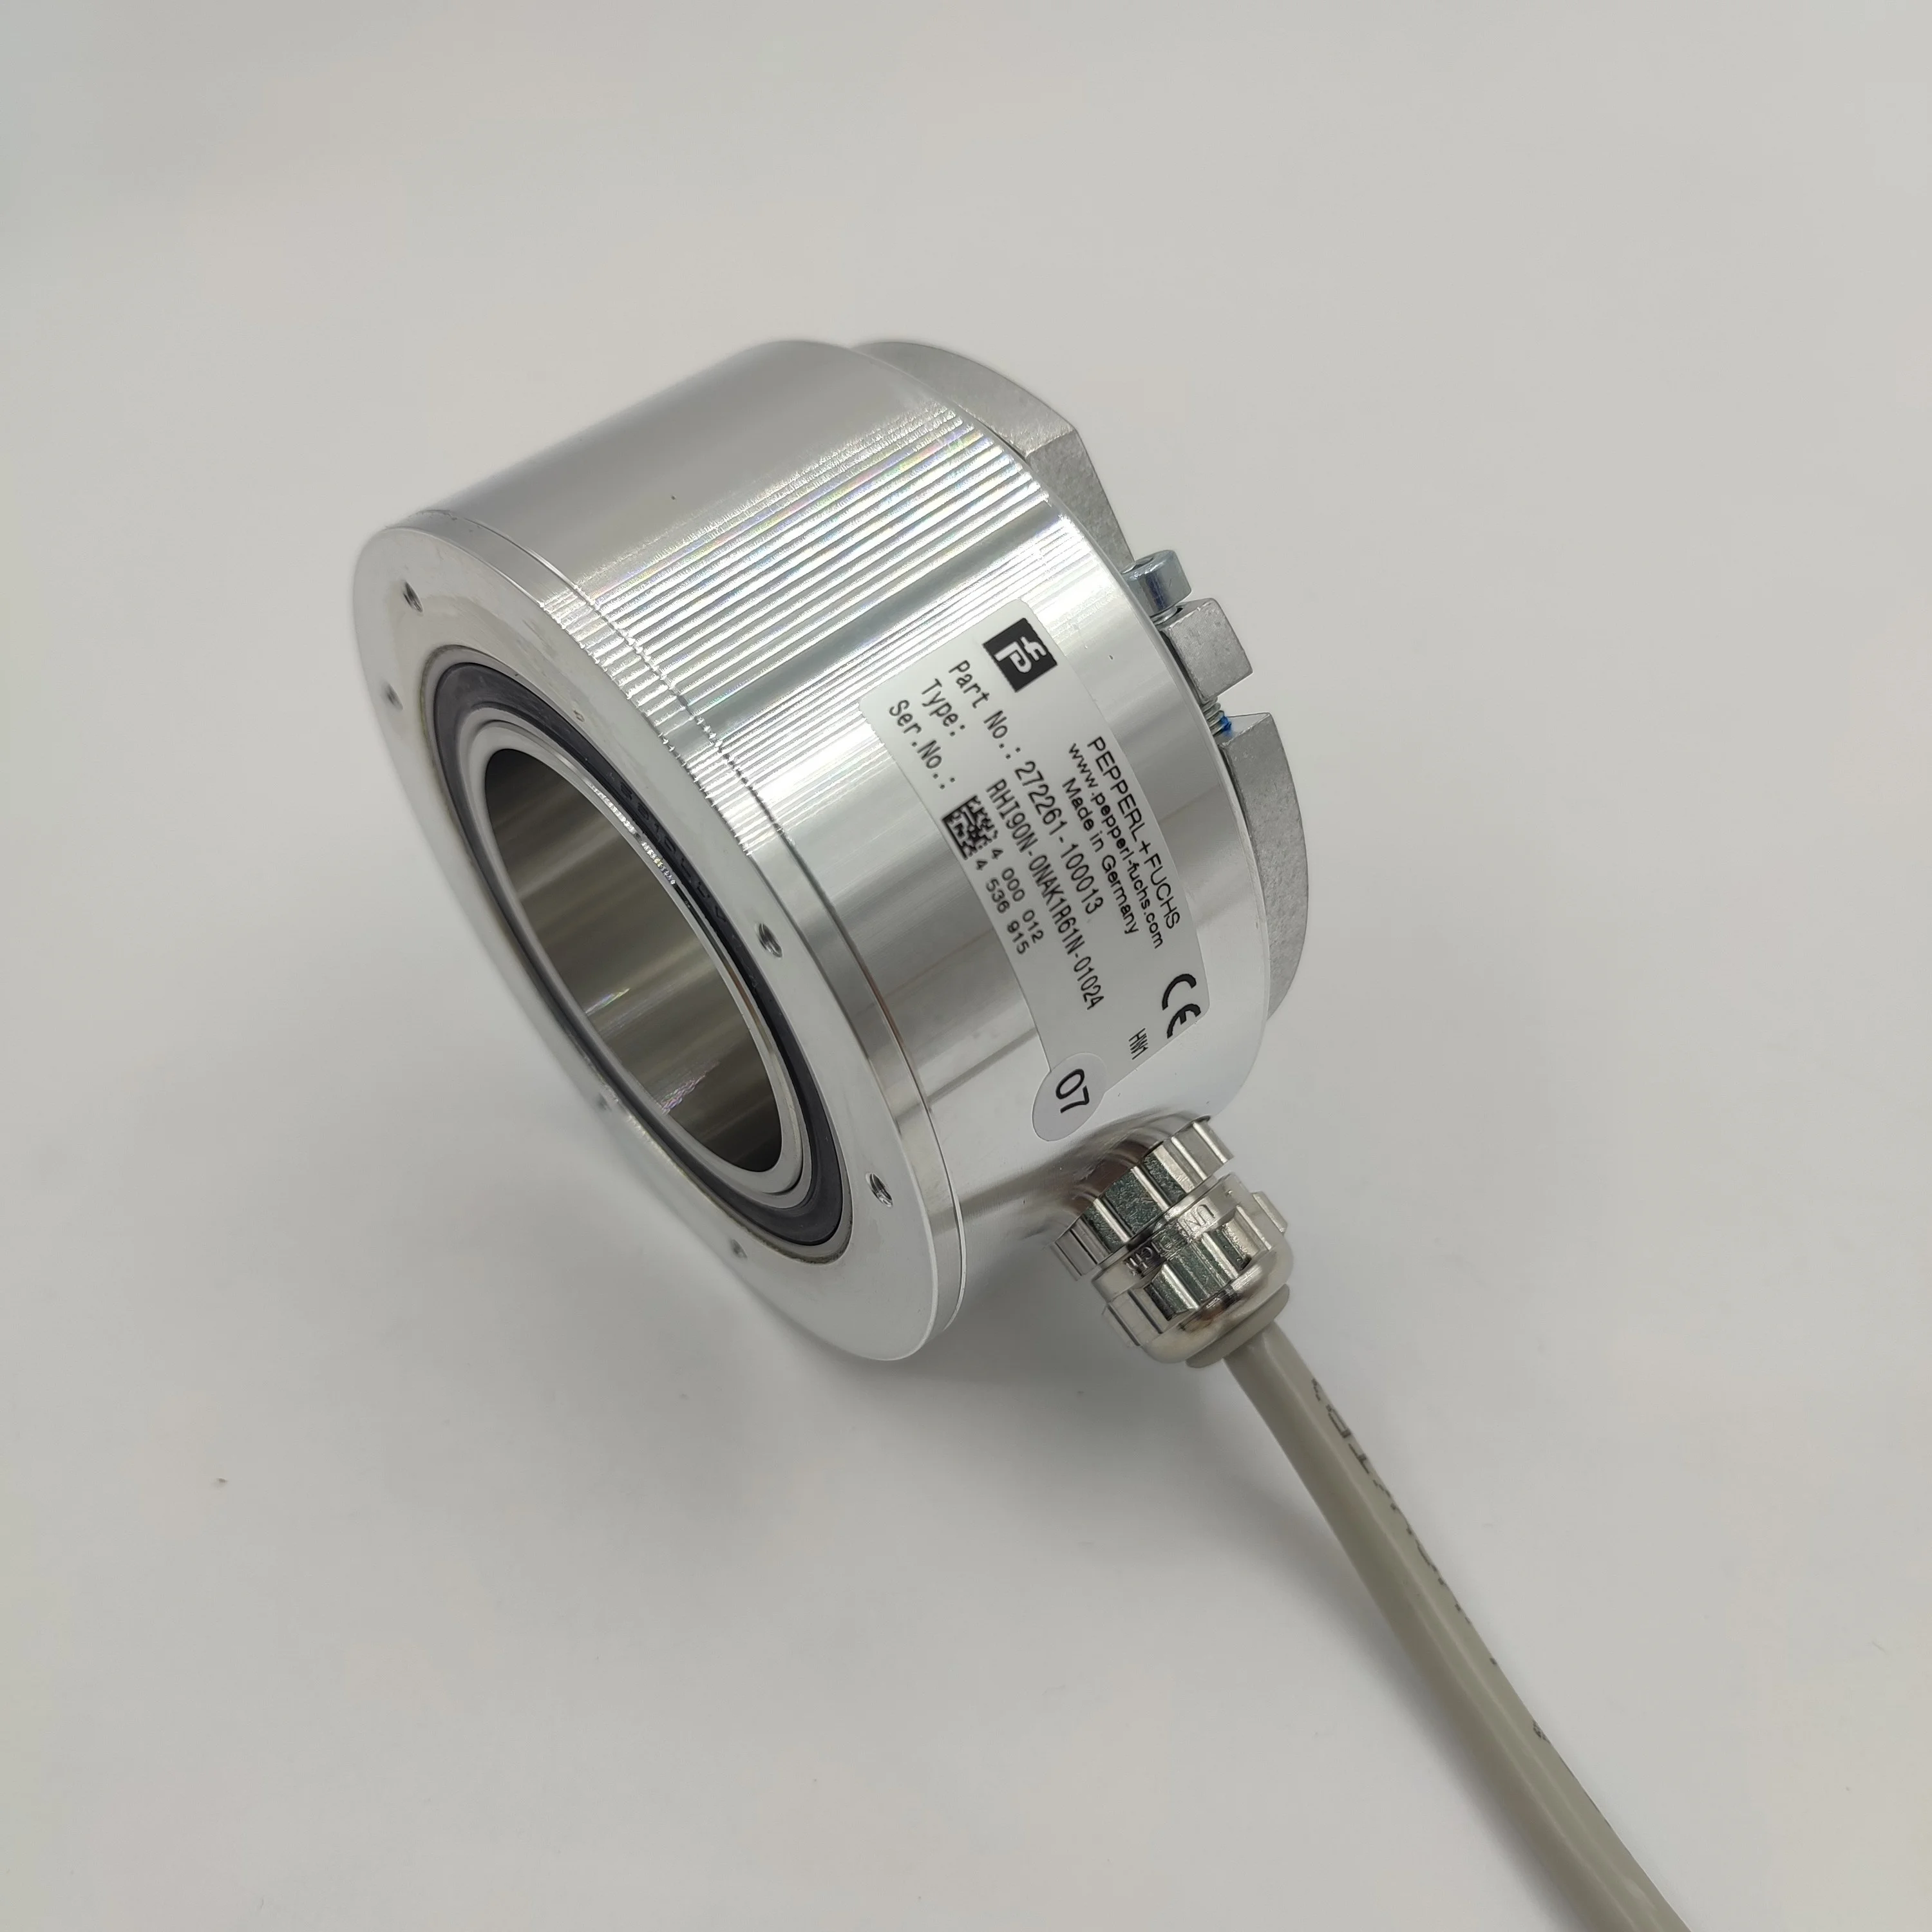 

RHI90N-0NAK1R61N-01024(276621-100013) P+F Hollow shaft rotary encoder New original genuine goods are available from stock